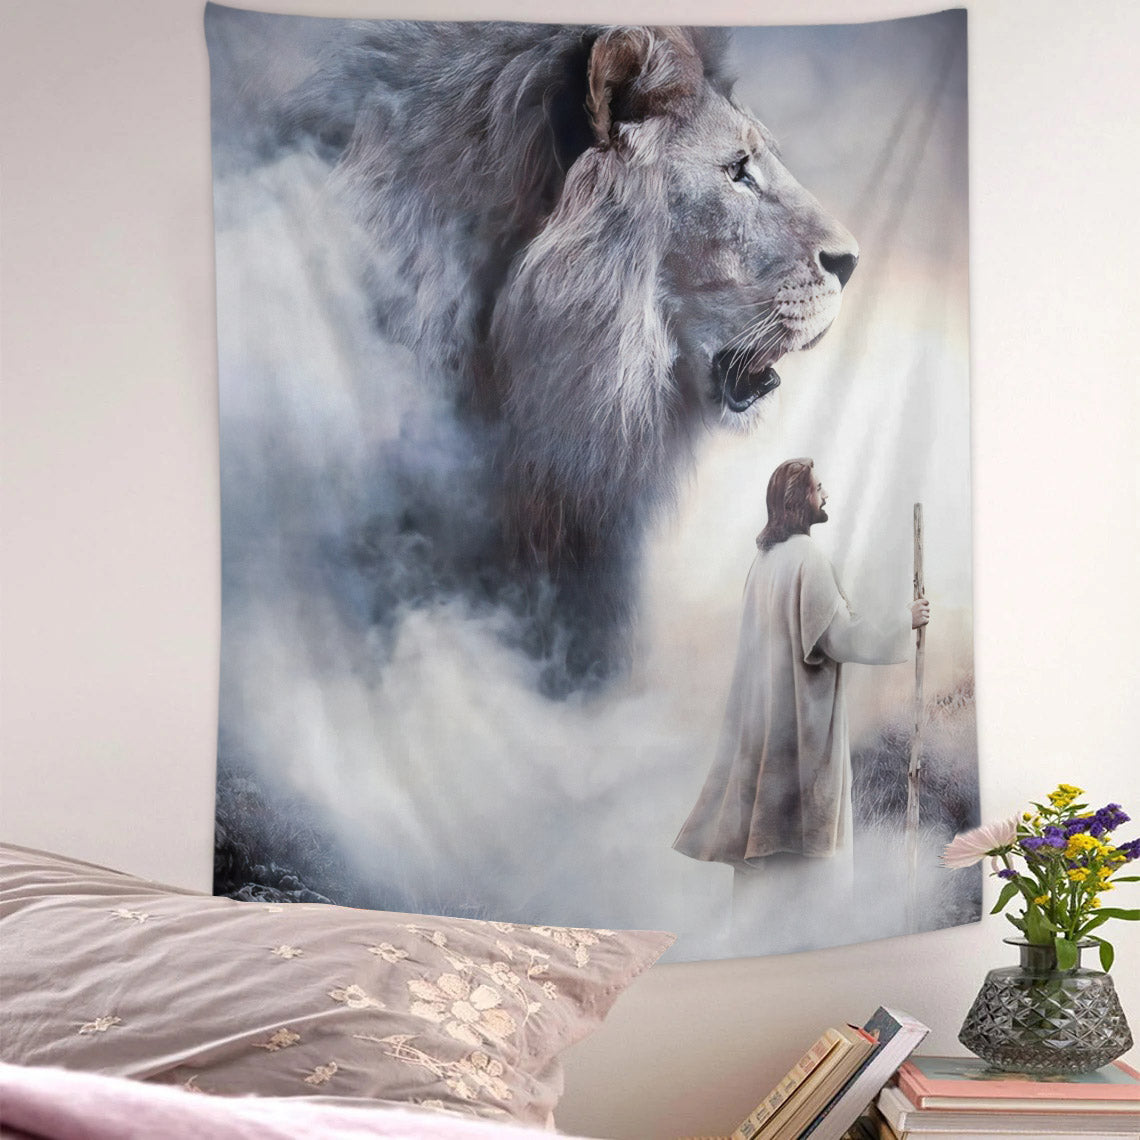 Jesus And Lion Tapestry - Jesus Tapestry - Christian Tapestry - Jesus Wall Art - Christian Tapestry Wall Hanging - Gift For Christian - Ciaocustom